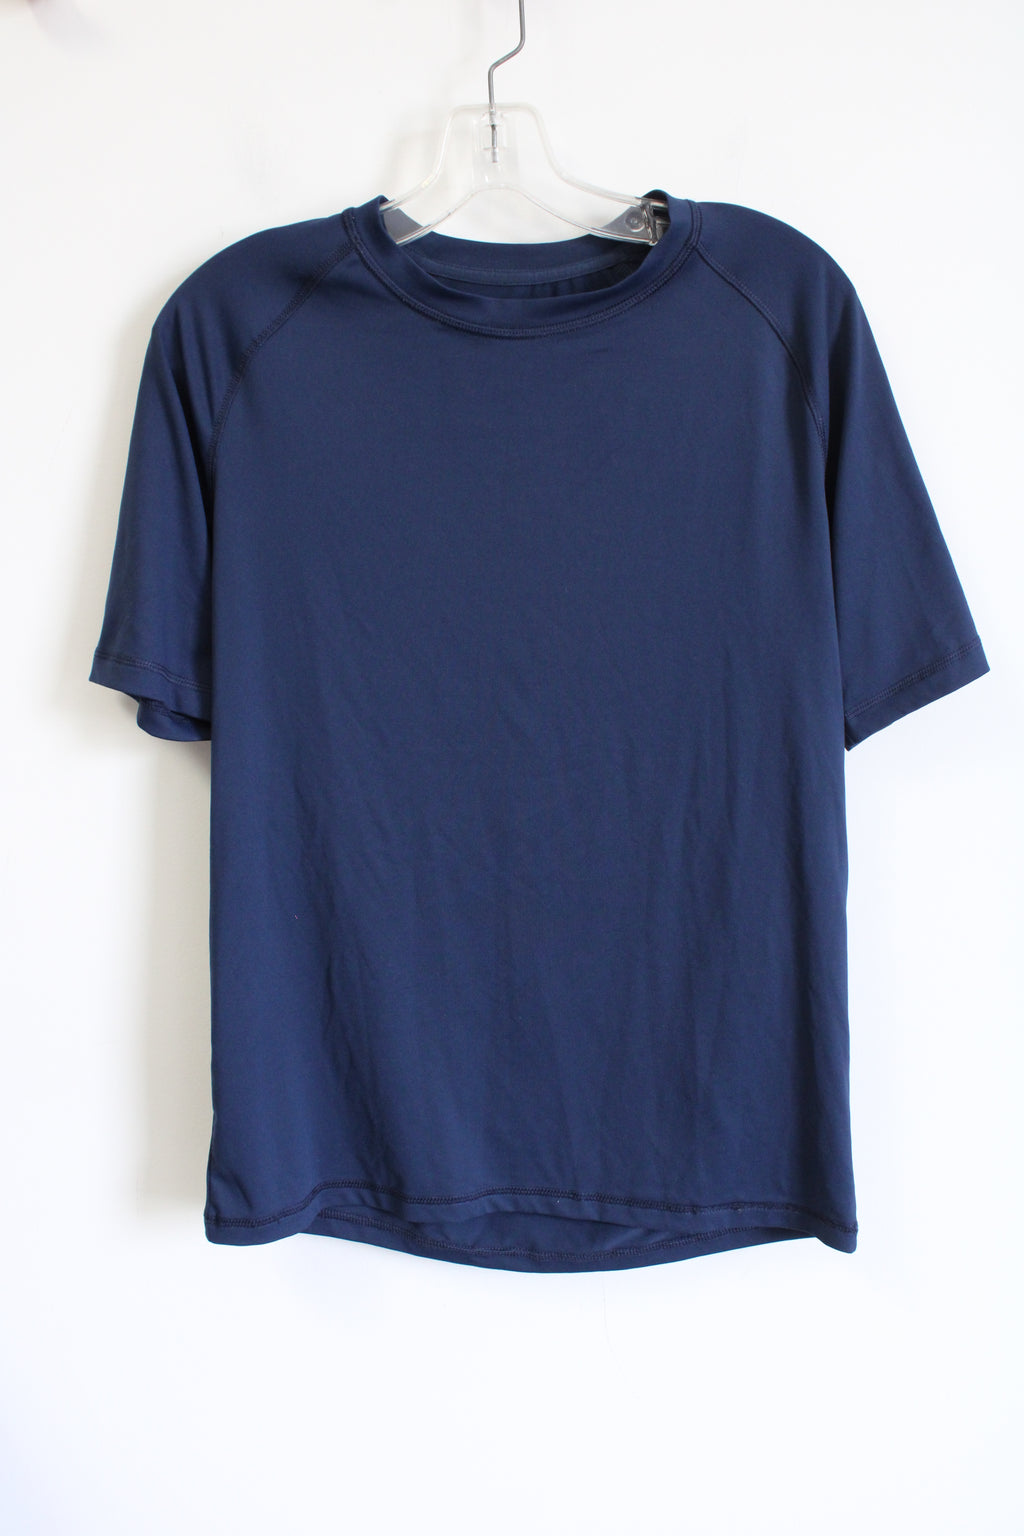 George Solid Navy Athletic Shirt | S